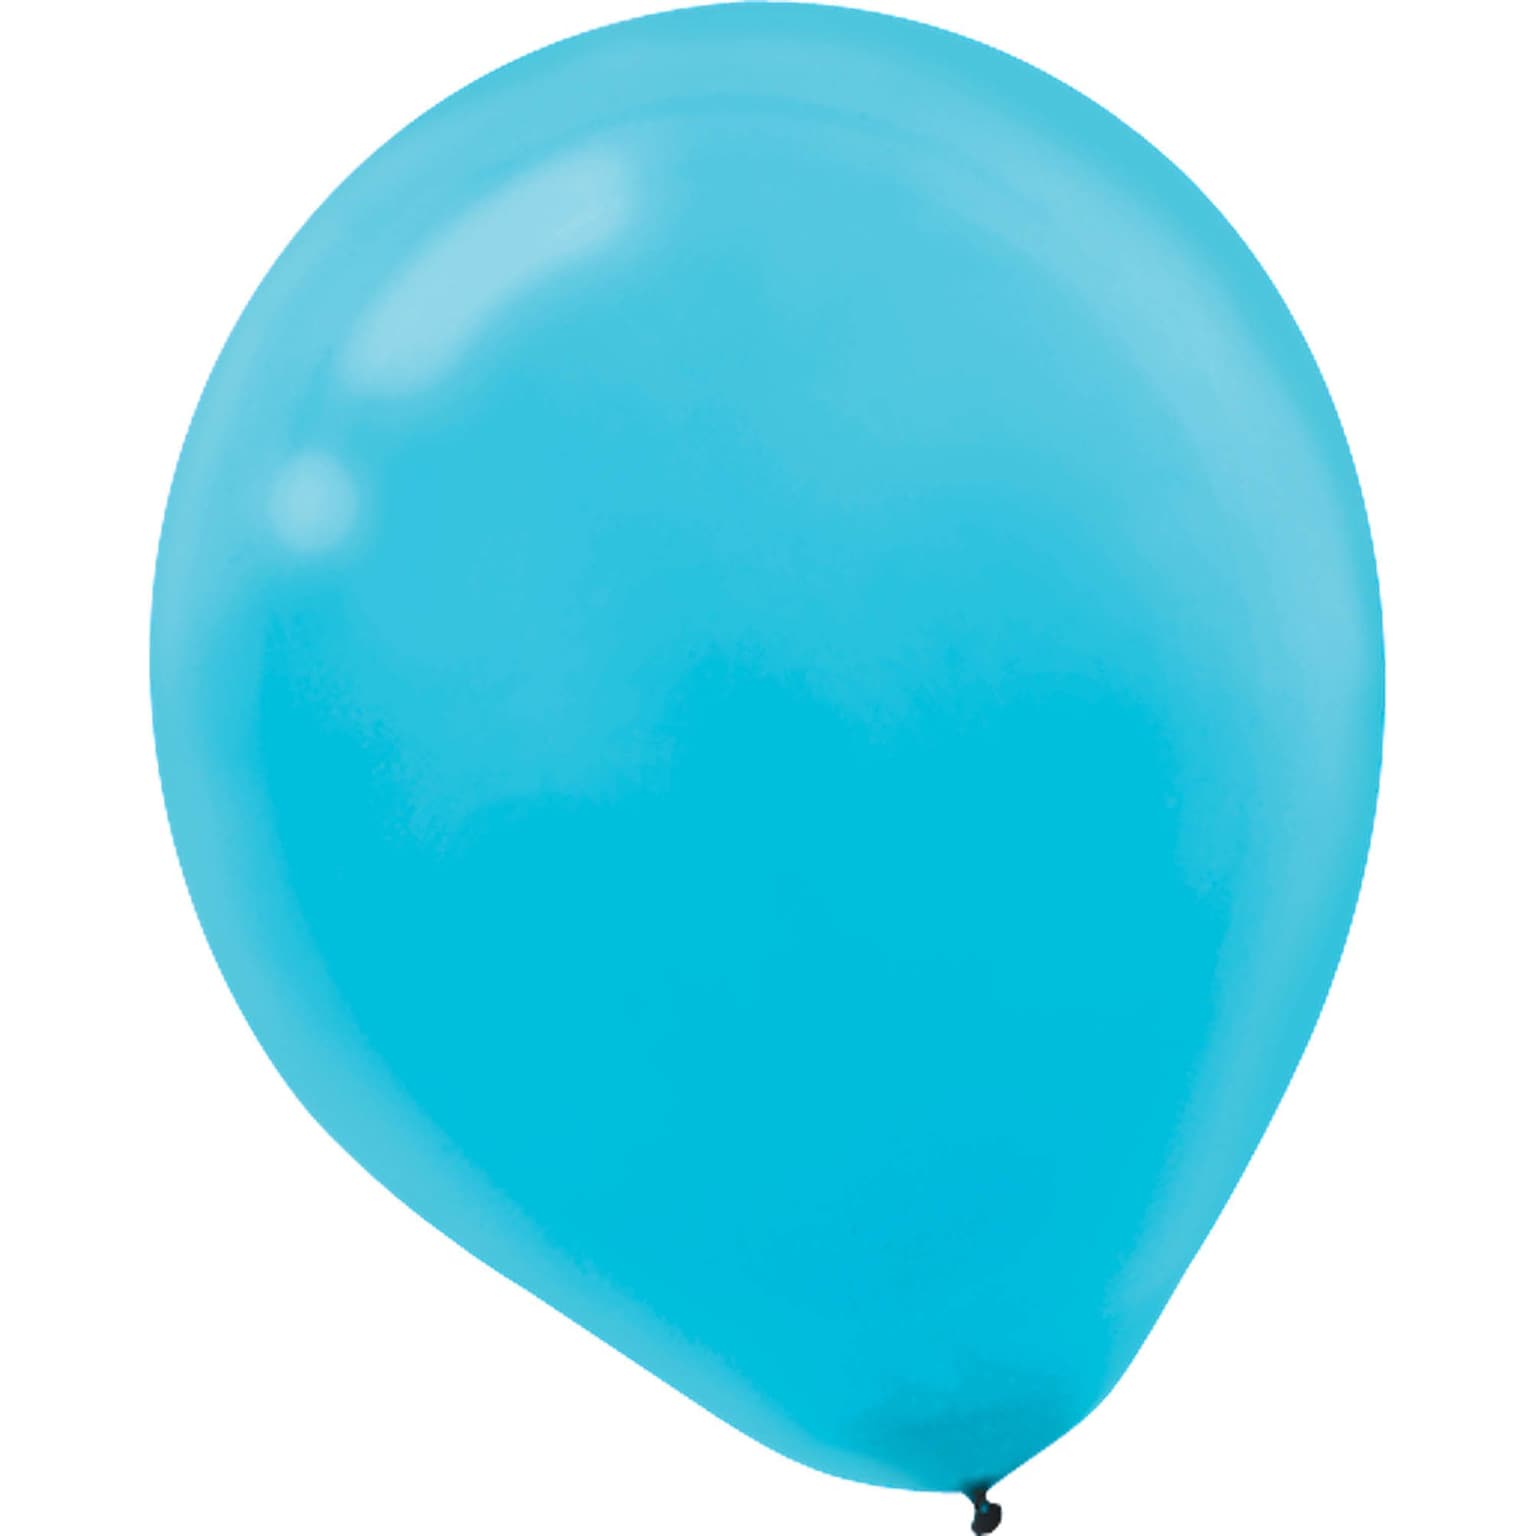 Amscan Solid Color Latex Balloons Packaged, 9, 18/Pack, Caribbean Blue, 20 Per Pack (113255.54)